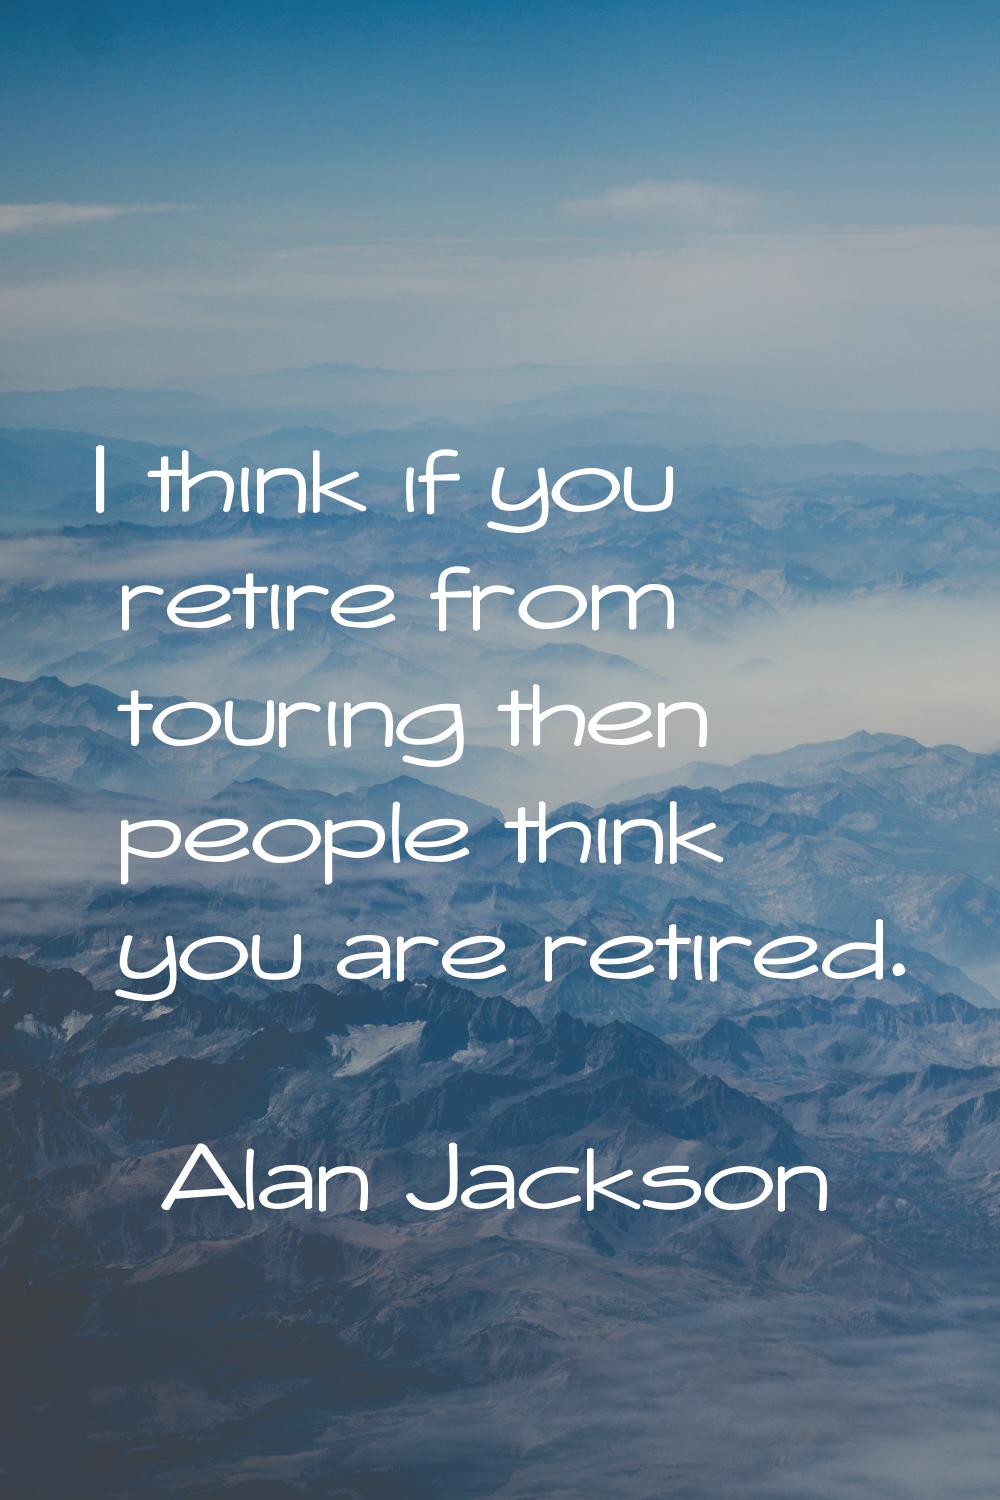 I think if you retire from touring then people think you are retired.